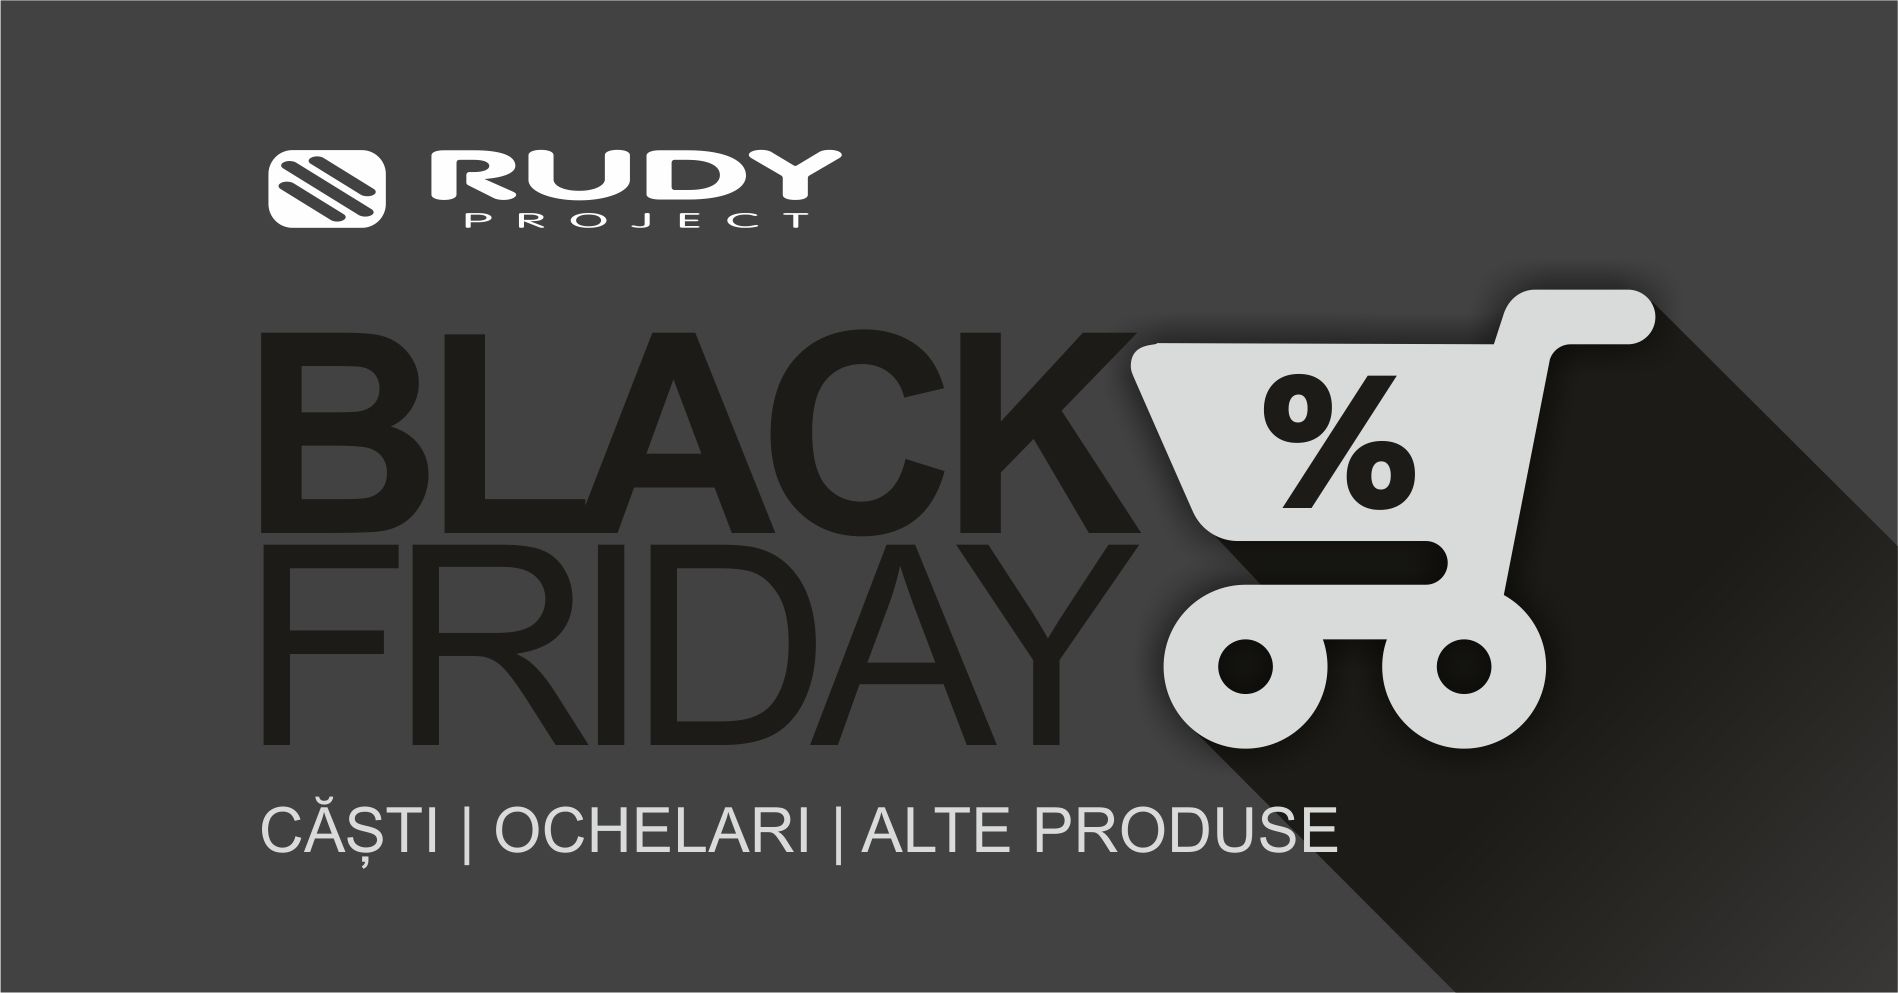 Rudy Project - Black Friday 2018